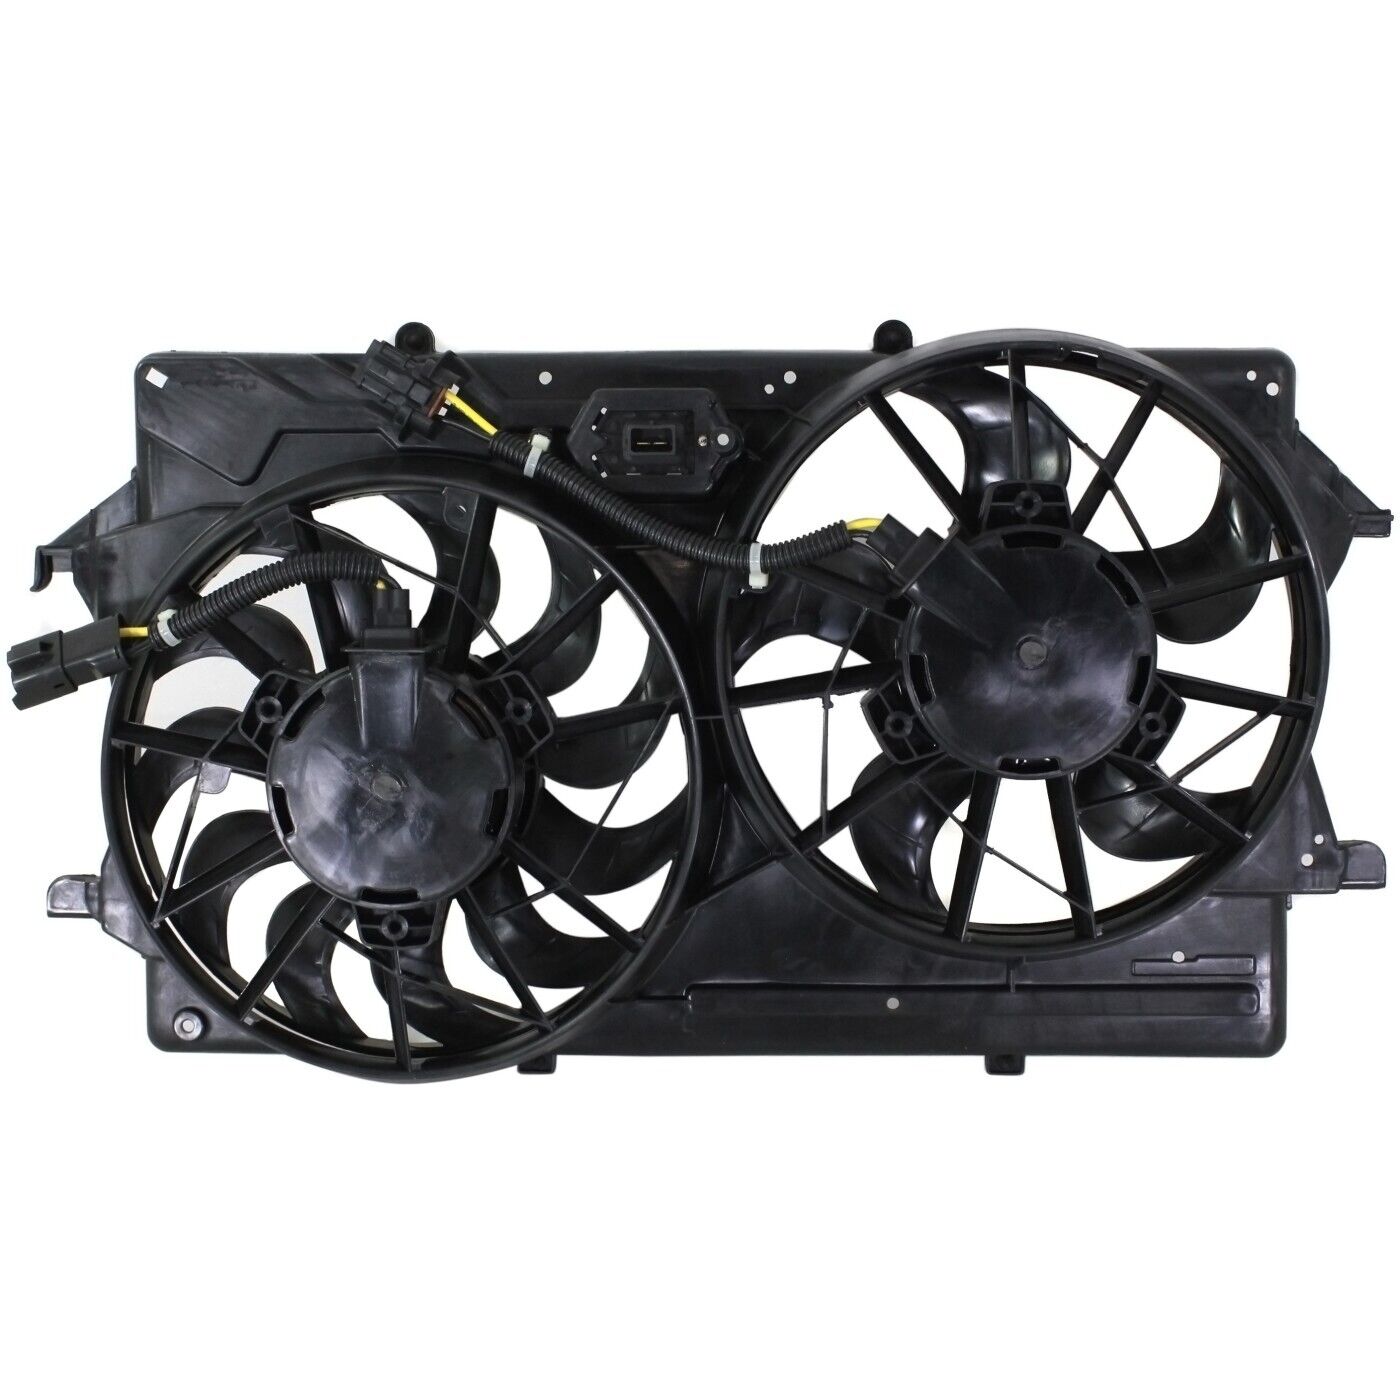 Radiator Cooling Fan For 2003-2004 Ford Focus 2.0L 4Cyl, For DOHC models, w/ AC